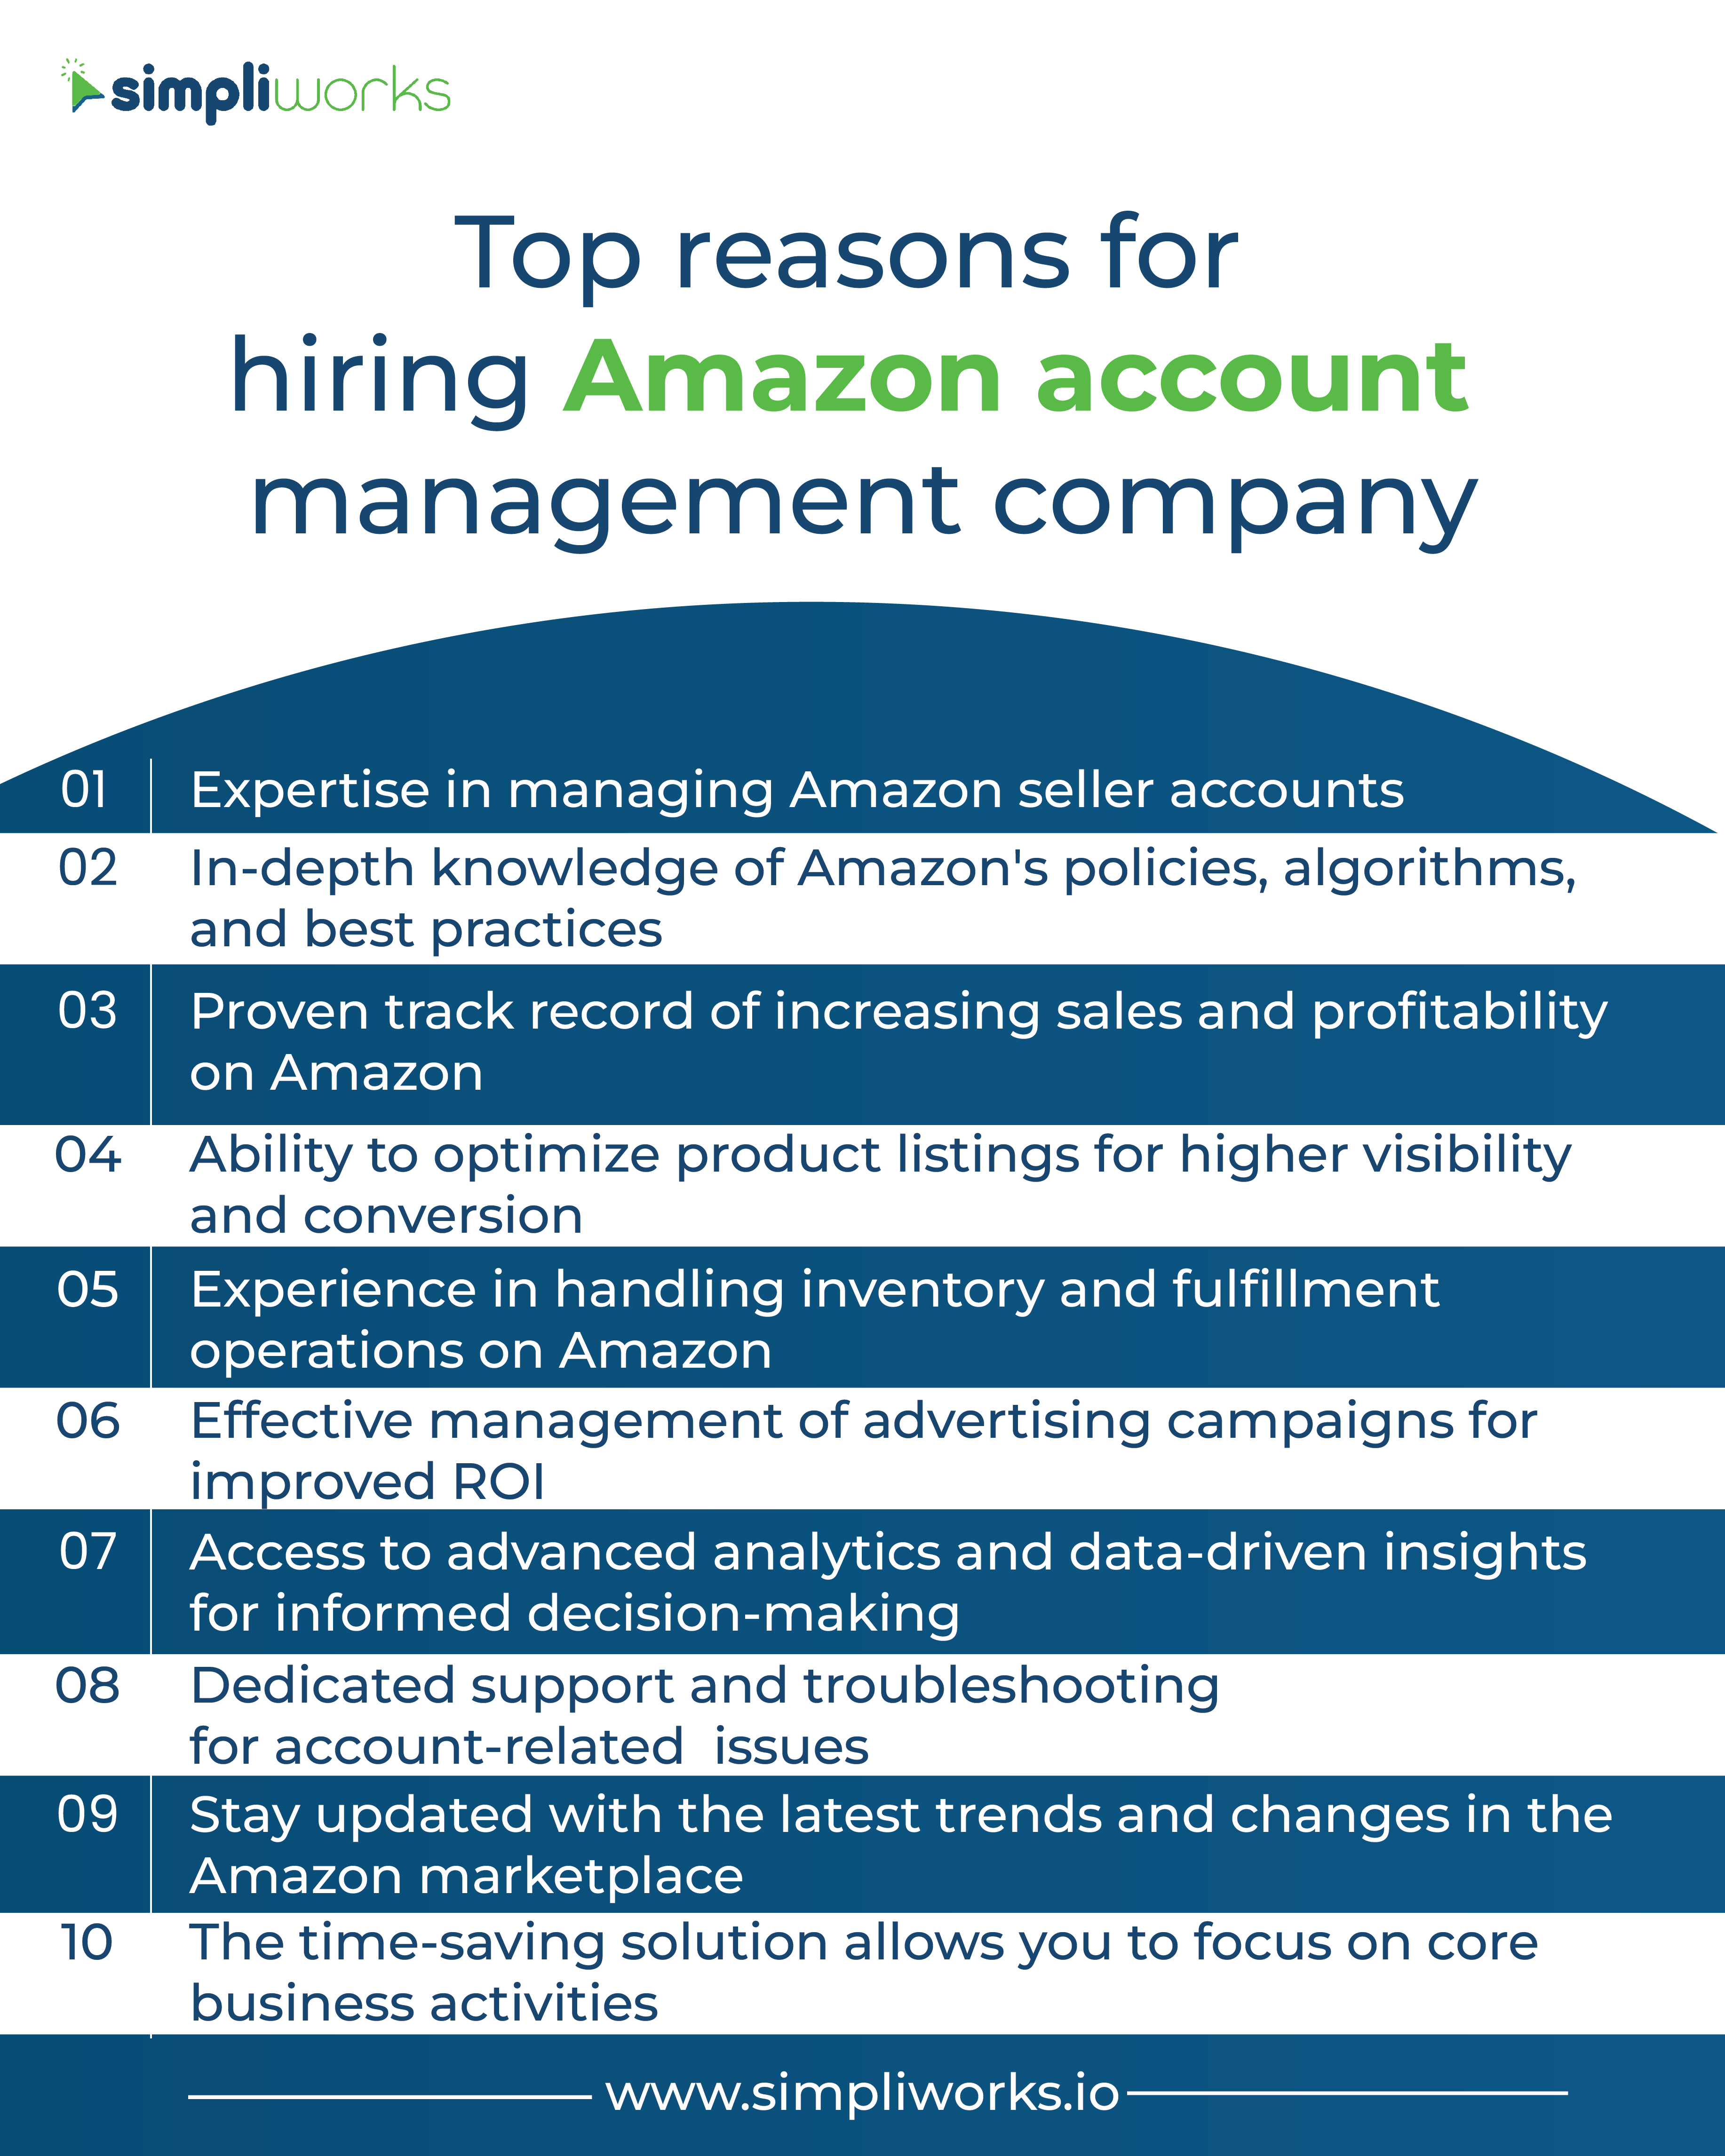 Top reasons for hiring Amazon account management company_Infographic-07